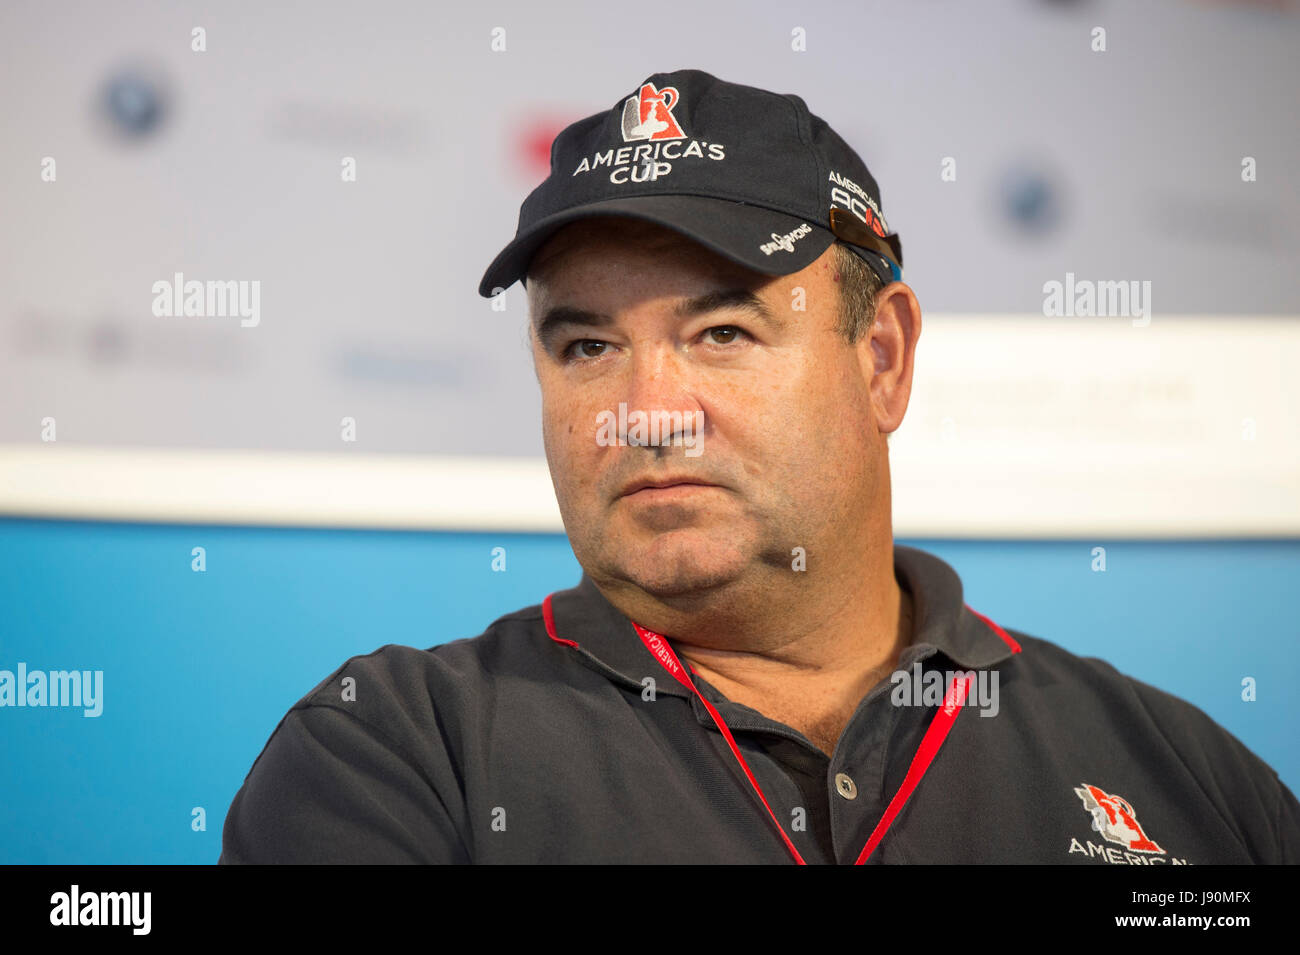 Bermuda. 30th May, 2017. Richard Slater, Head of rules and umpiring for ACRM. America's Cup. Credit: Chris Cameron/Alamy Live News Stock Photo